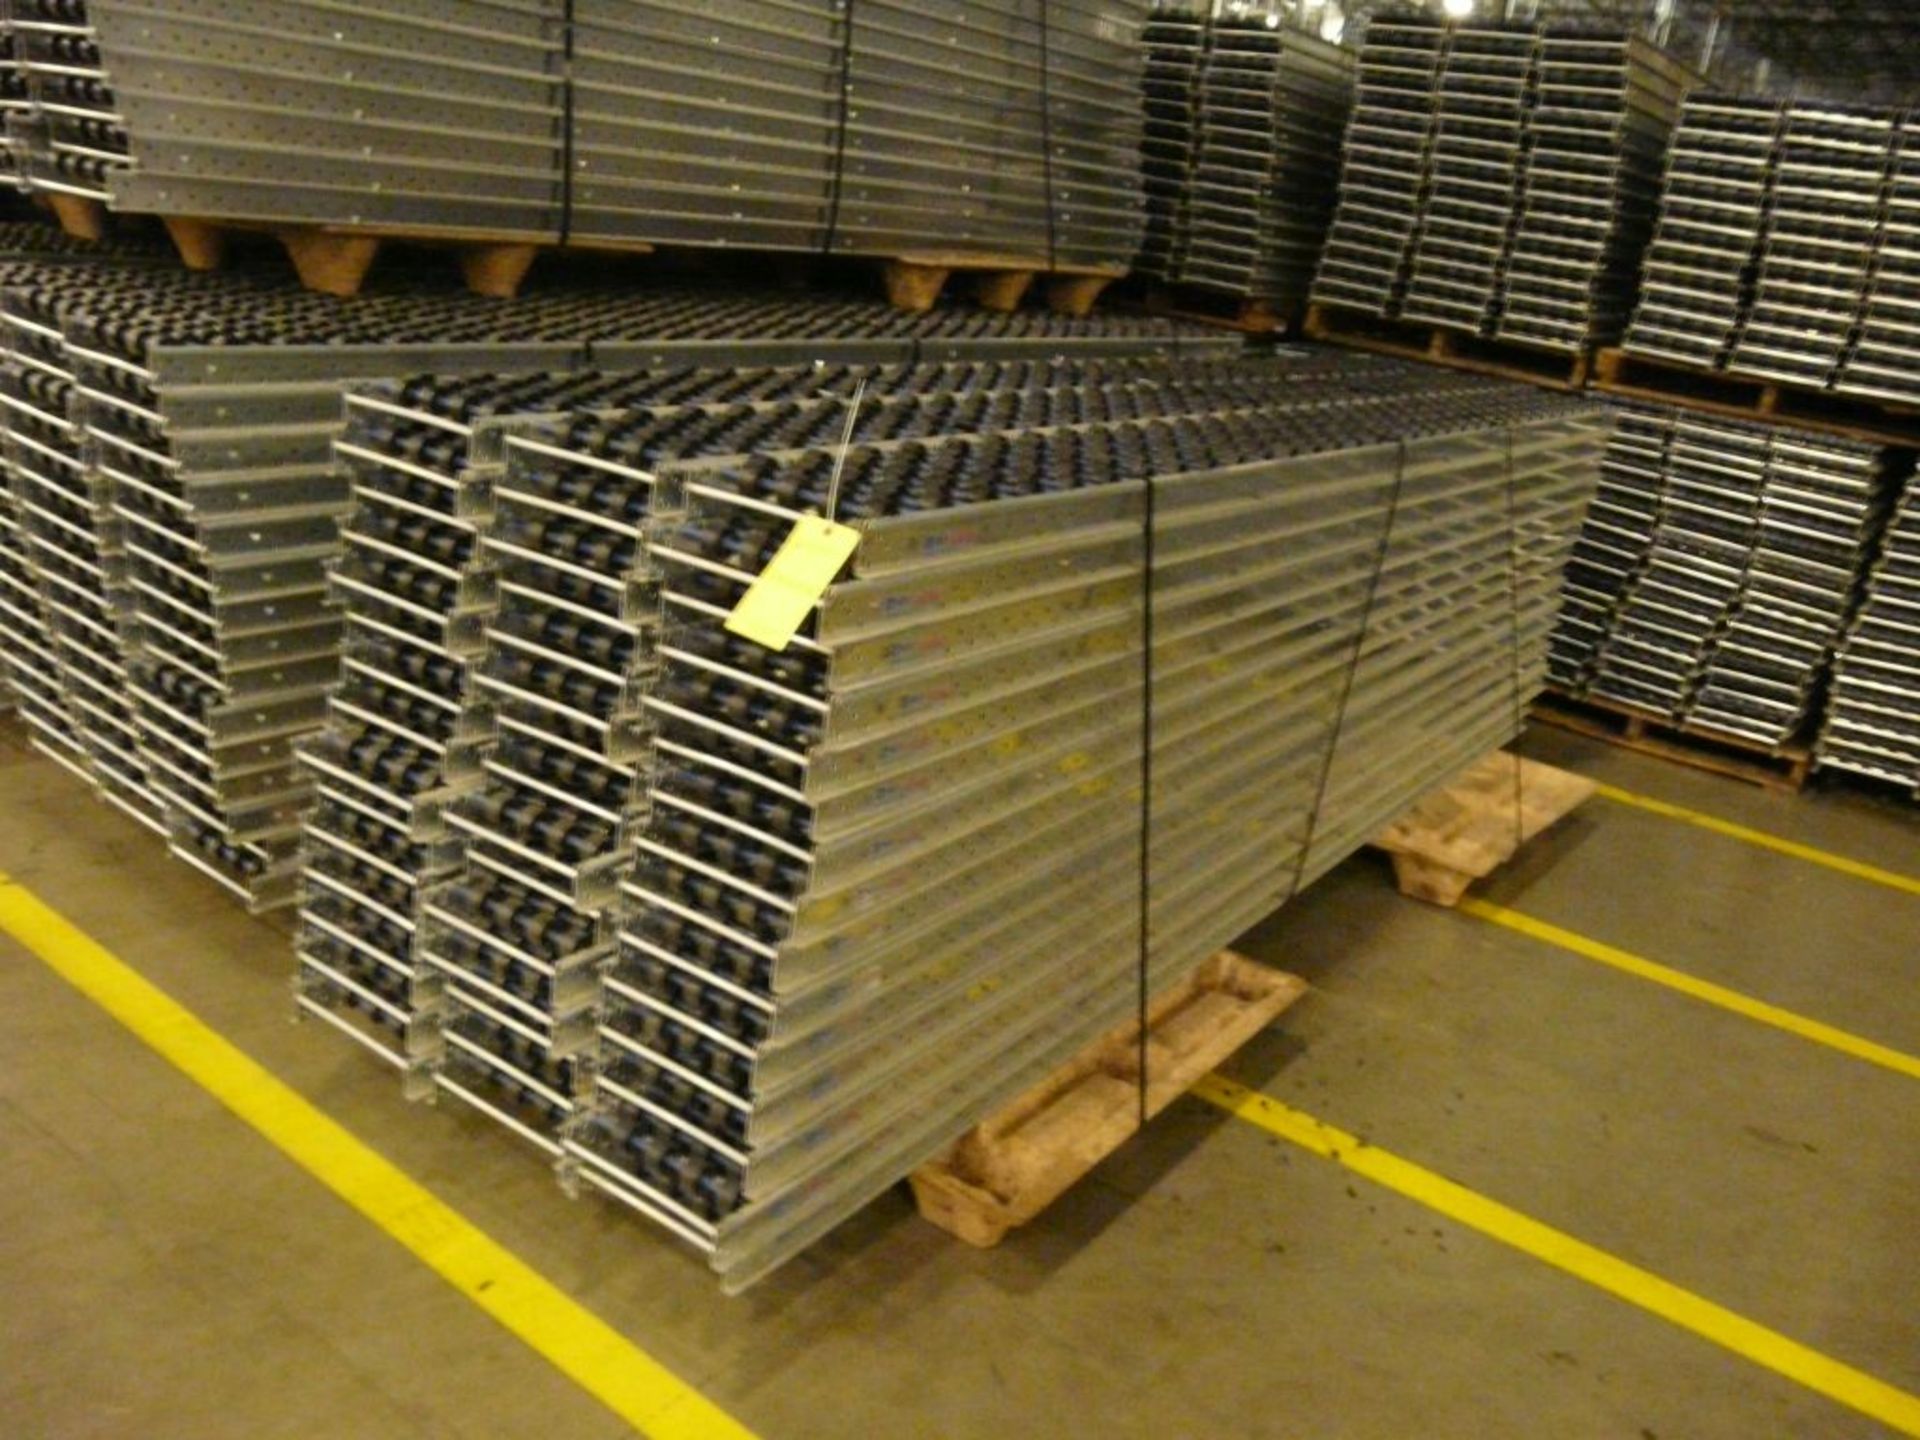 Lot of (90) SpanTrack Wheelbed Carton Flow Conveyors - 11.5'L x 11"W; Tag: 223568 - $30 Lot